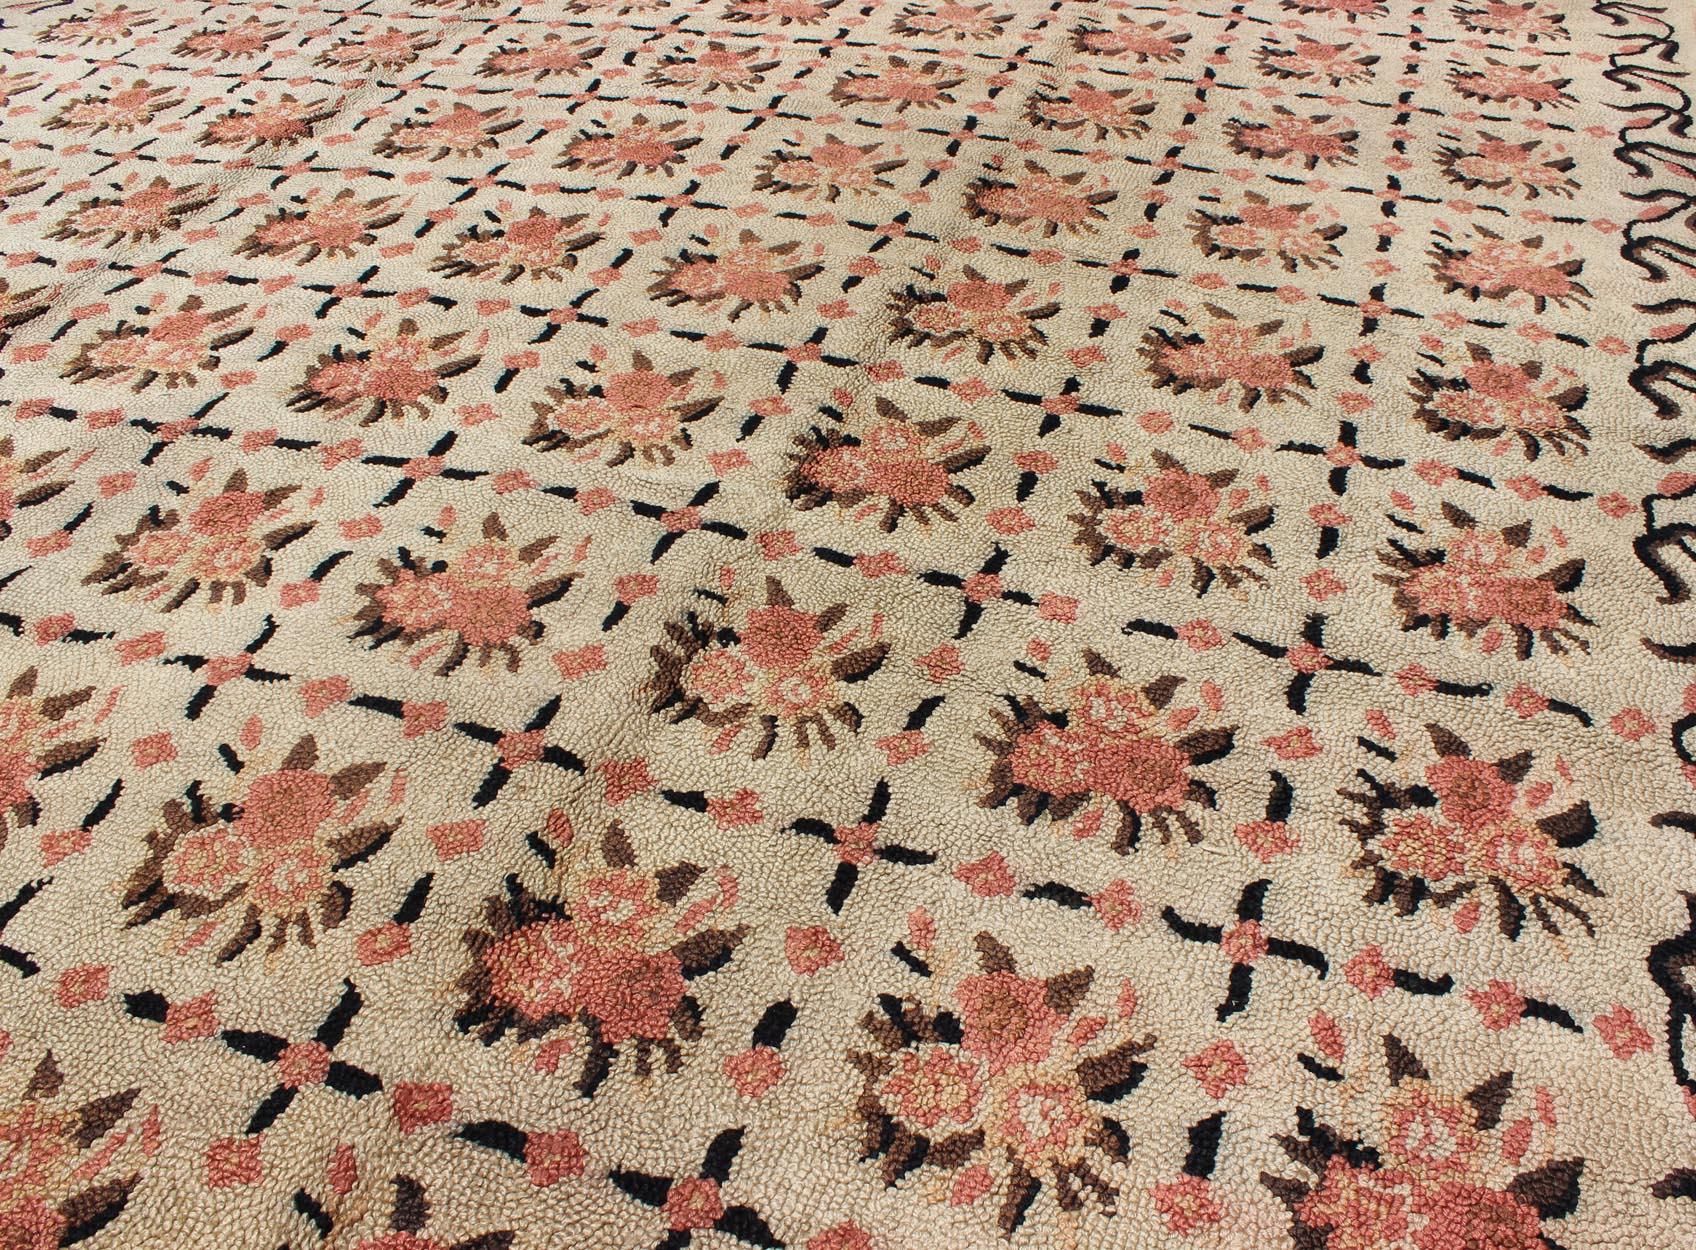 Vintage American Hooked Rug with All-Over Checkered Pattern of Floral Bouquets 5